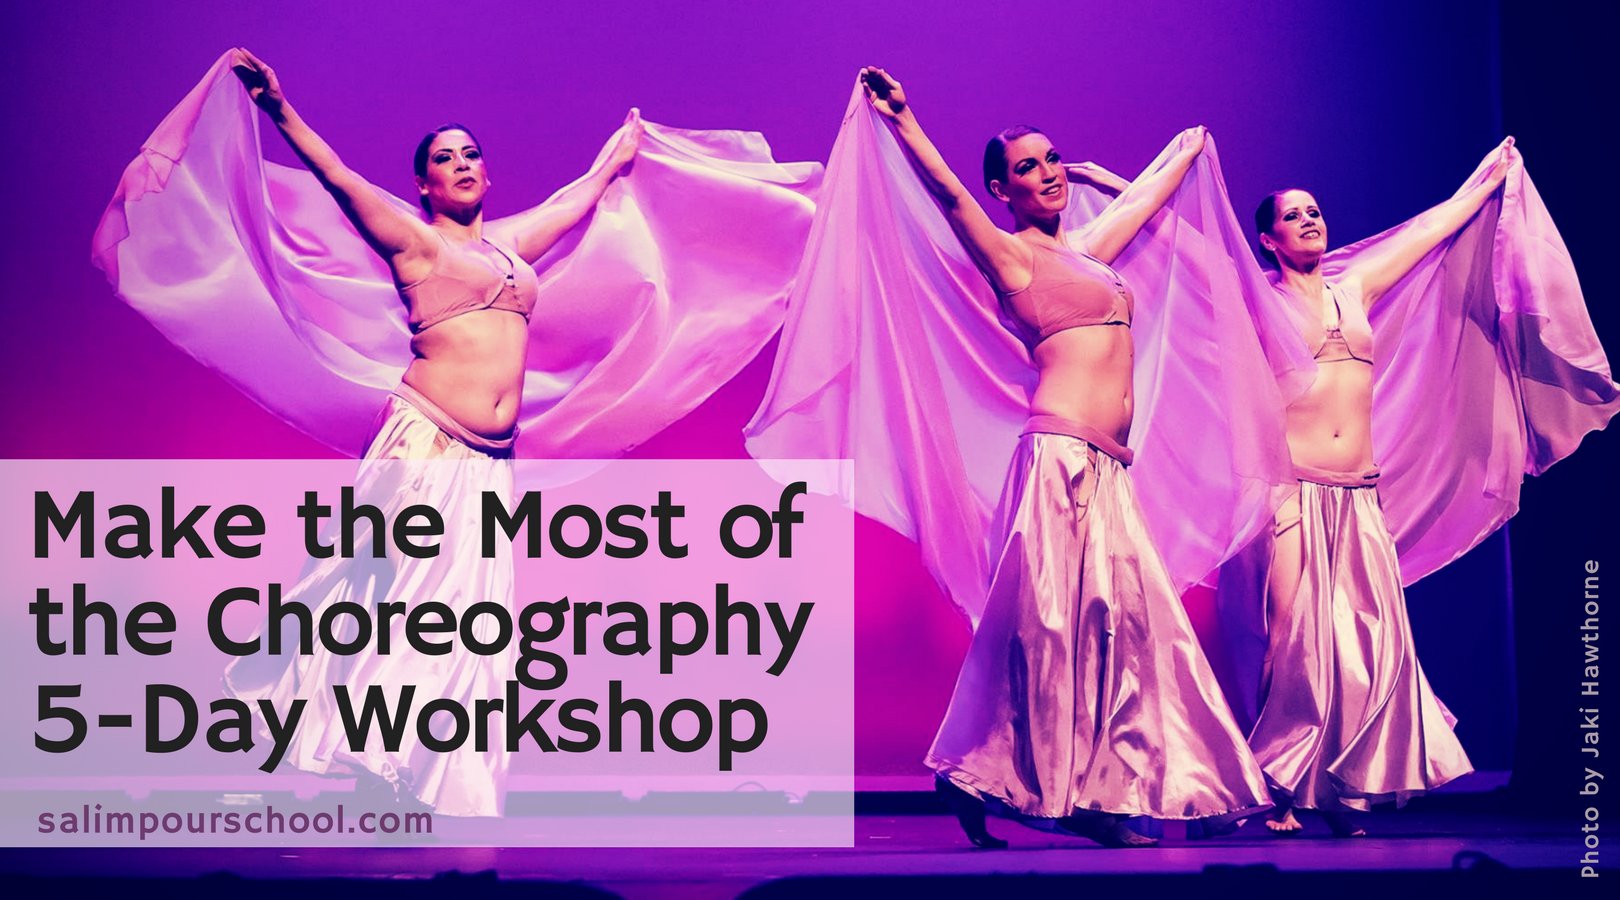 Choreography 5-Day Workshop, Belly Dance at the Salimpour School